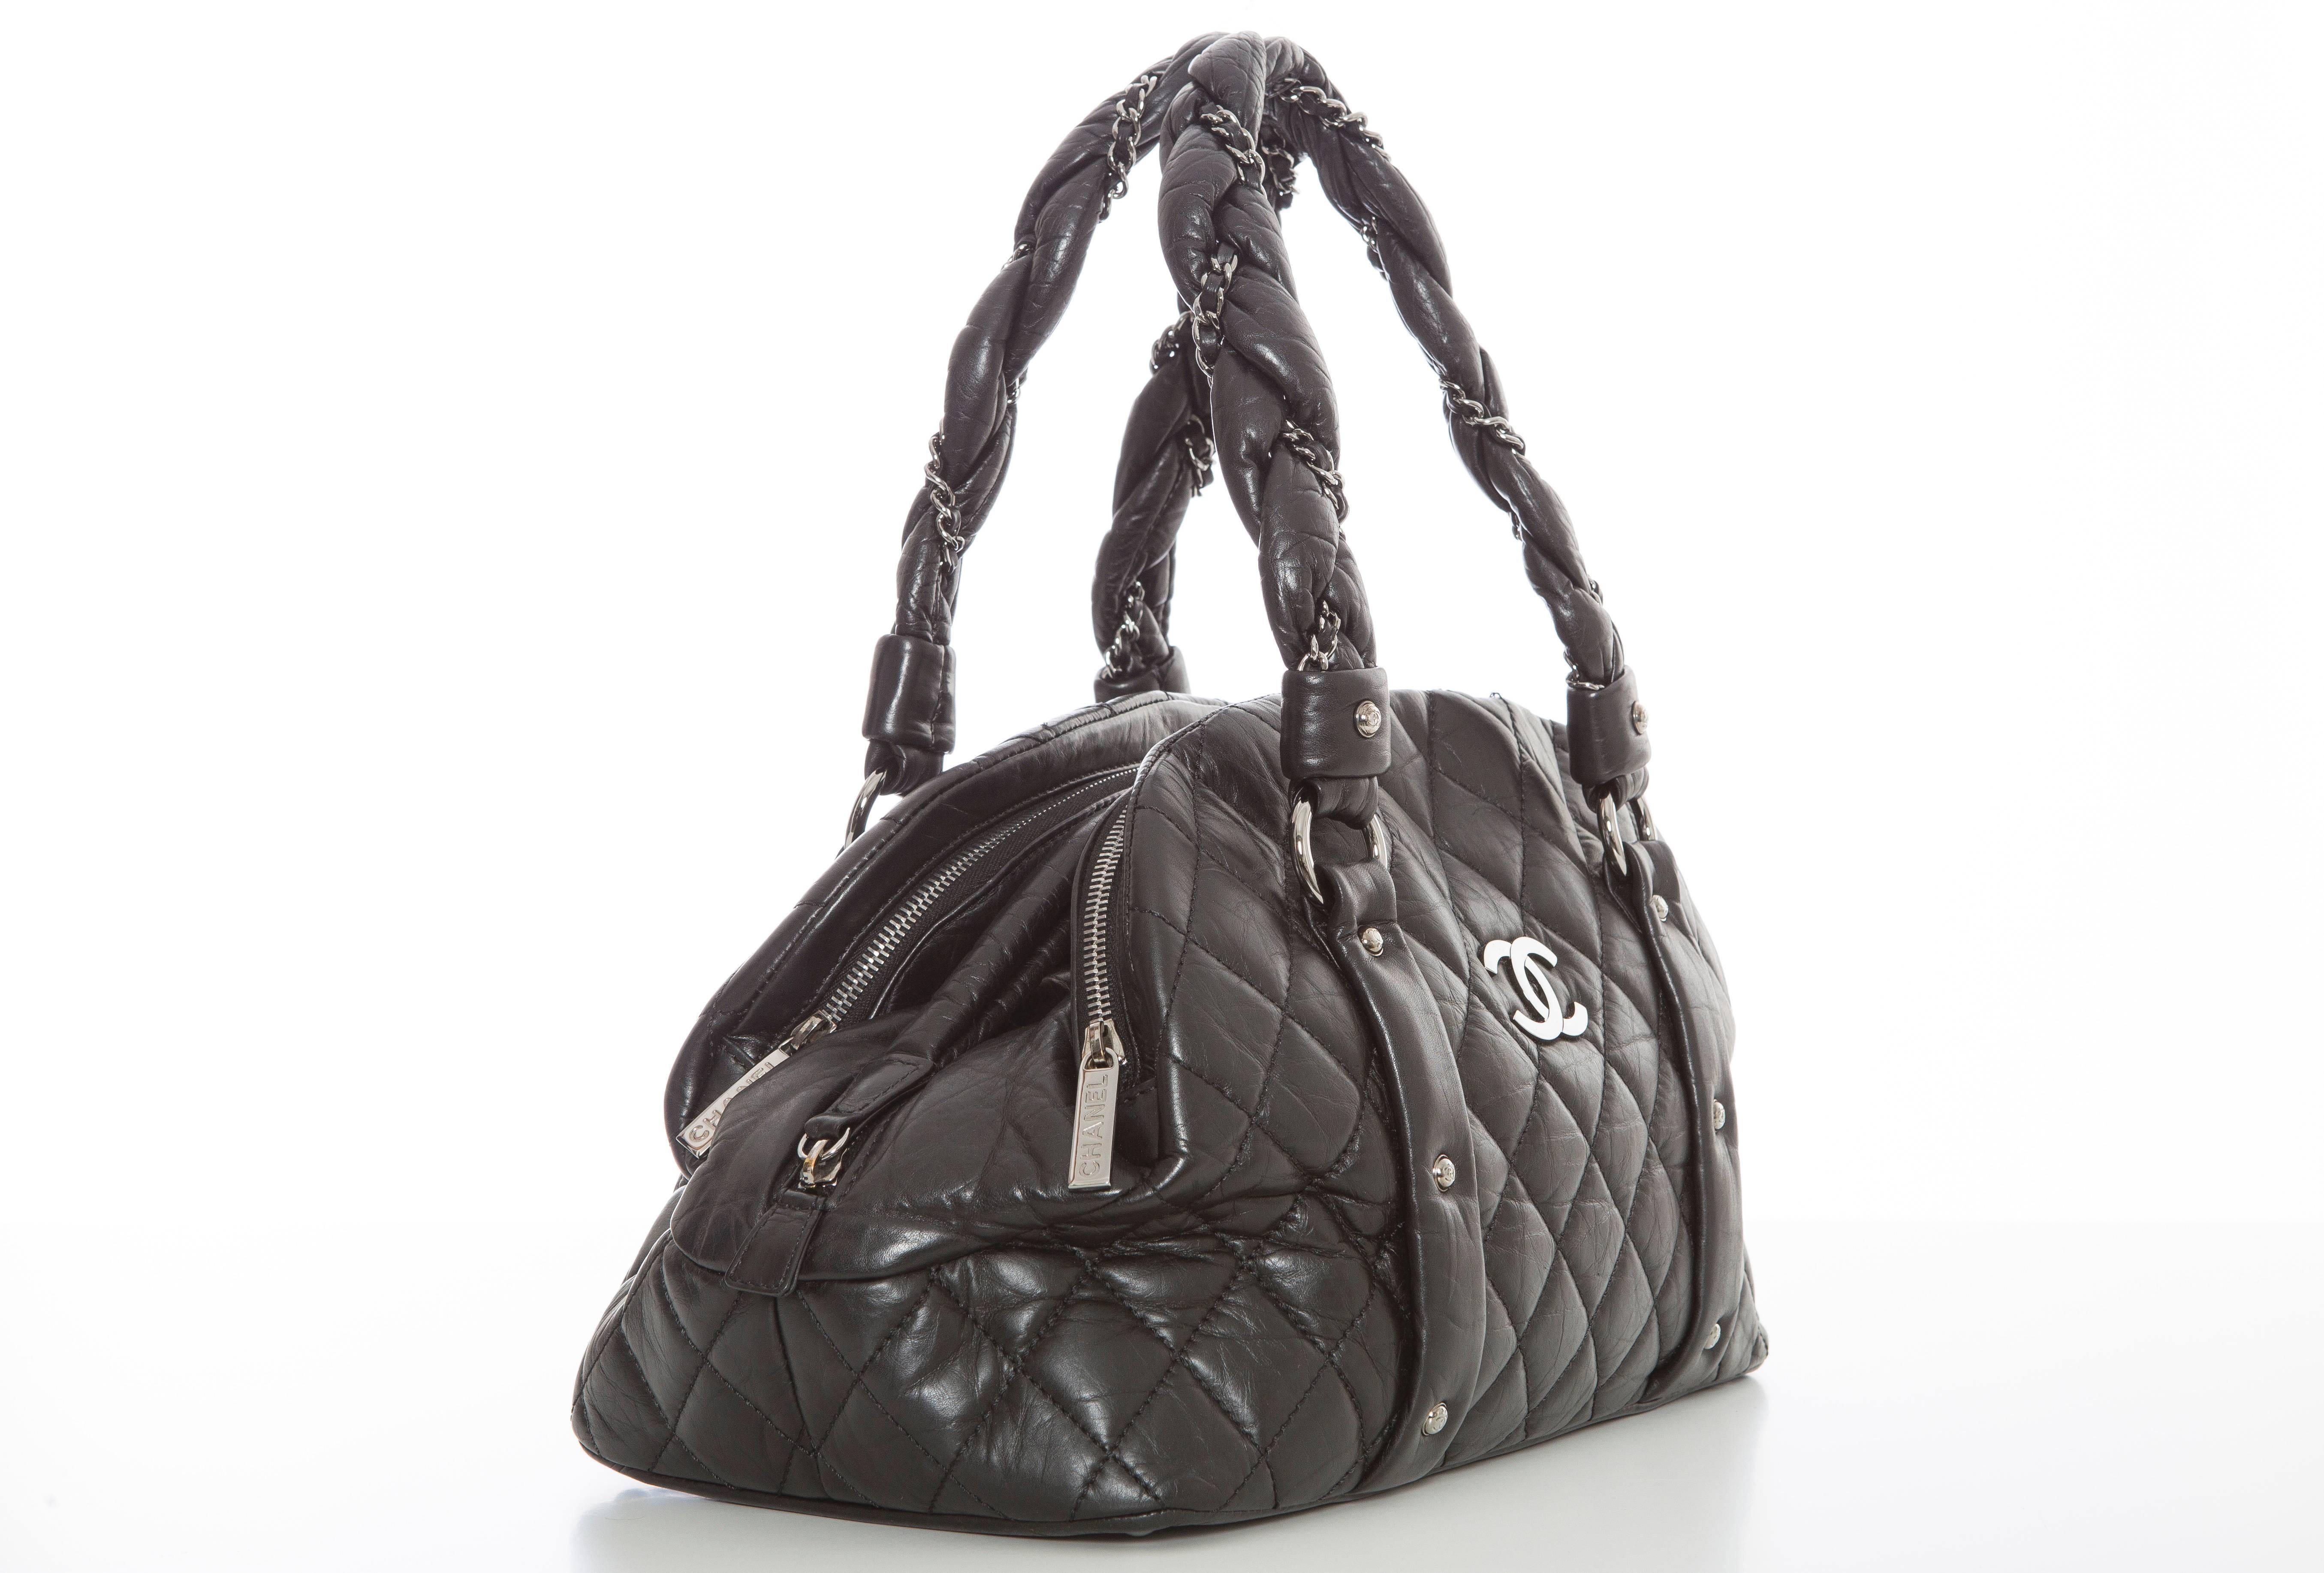  Chanel Lady Braid Bowler bag, Autumn-Winter 2006, black quilted leather with gunmetal hardware, chain-link and leather shoulder straps, dual rolled shoulder straps, two exterior pockets with zip closures, black woven interior lining, single pocket